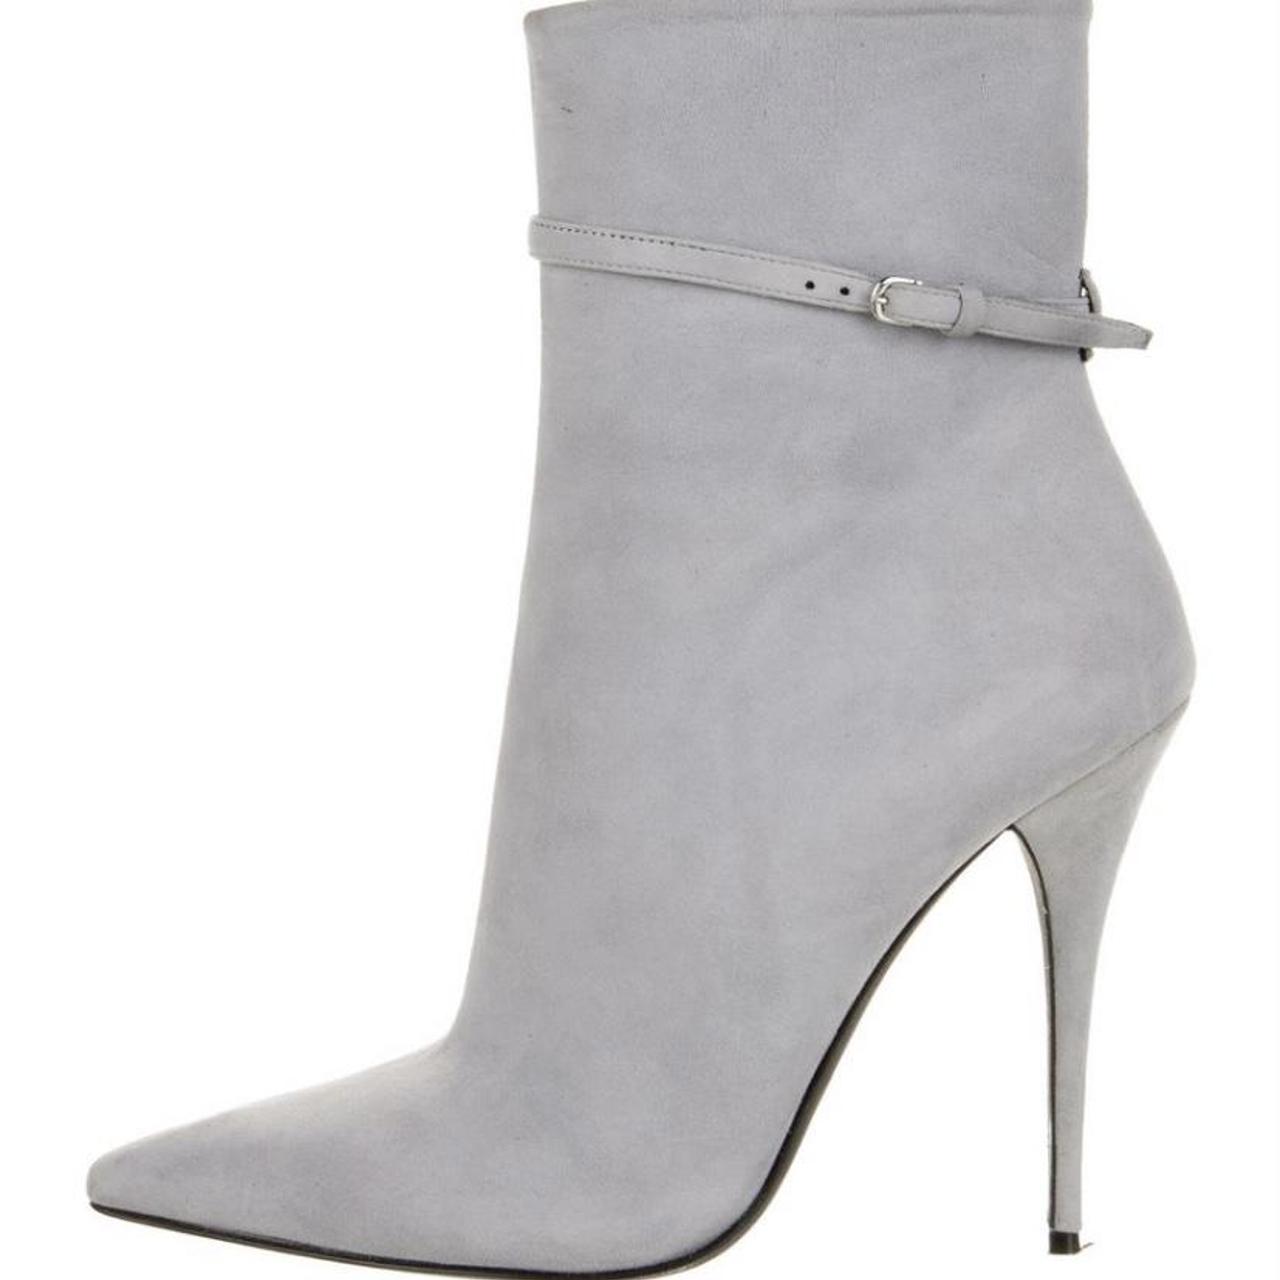 Product Image 2 - Narciso Rodriguez Grey Suede Ankle